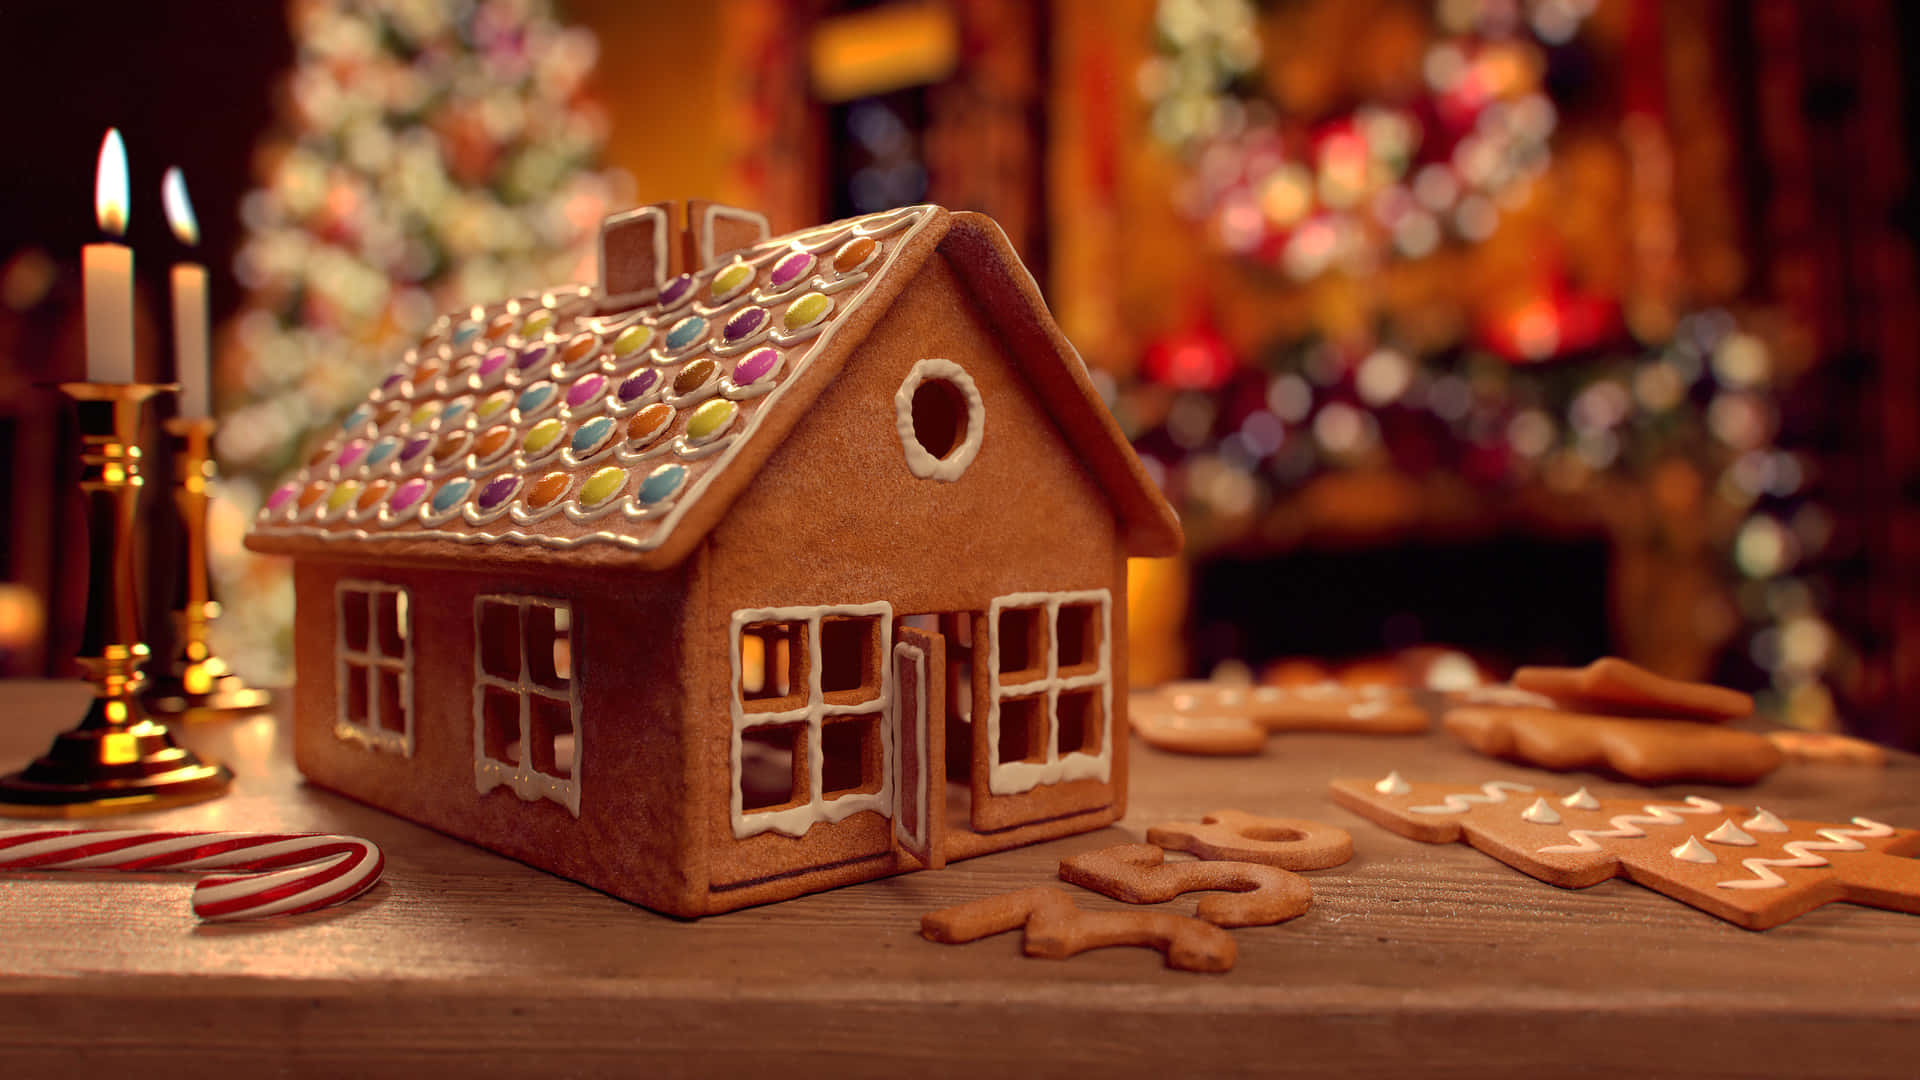 Delicious and Festive Gingerbread House